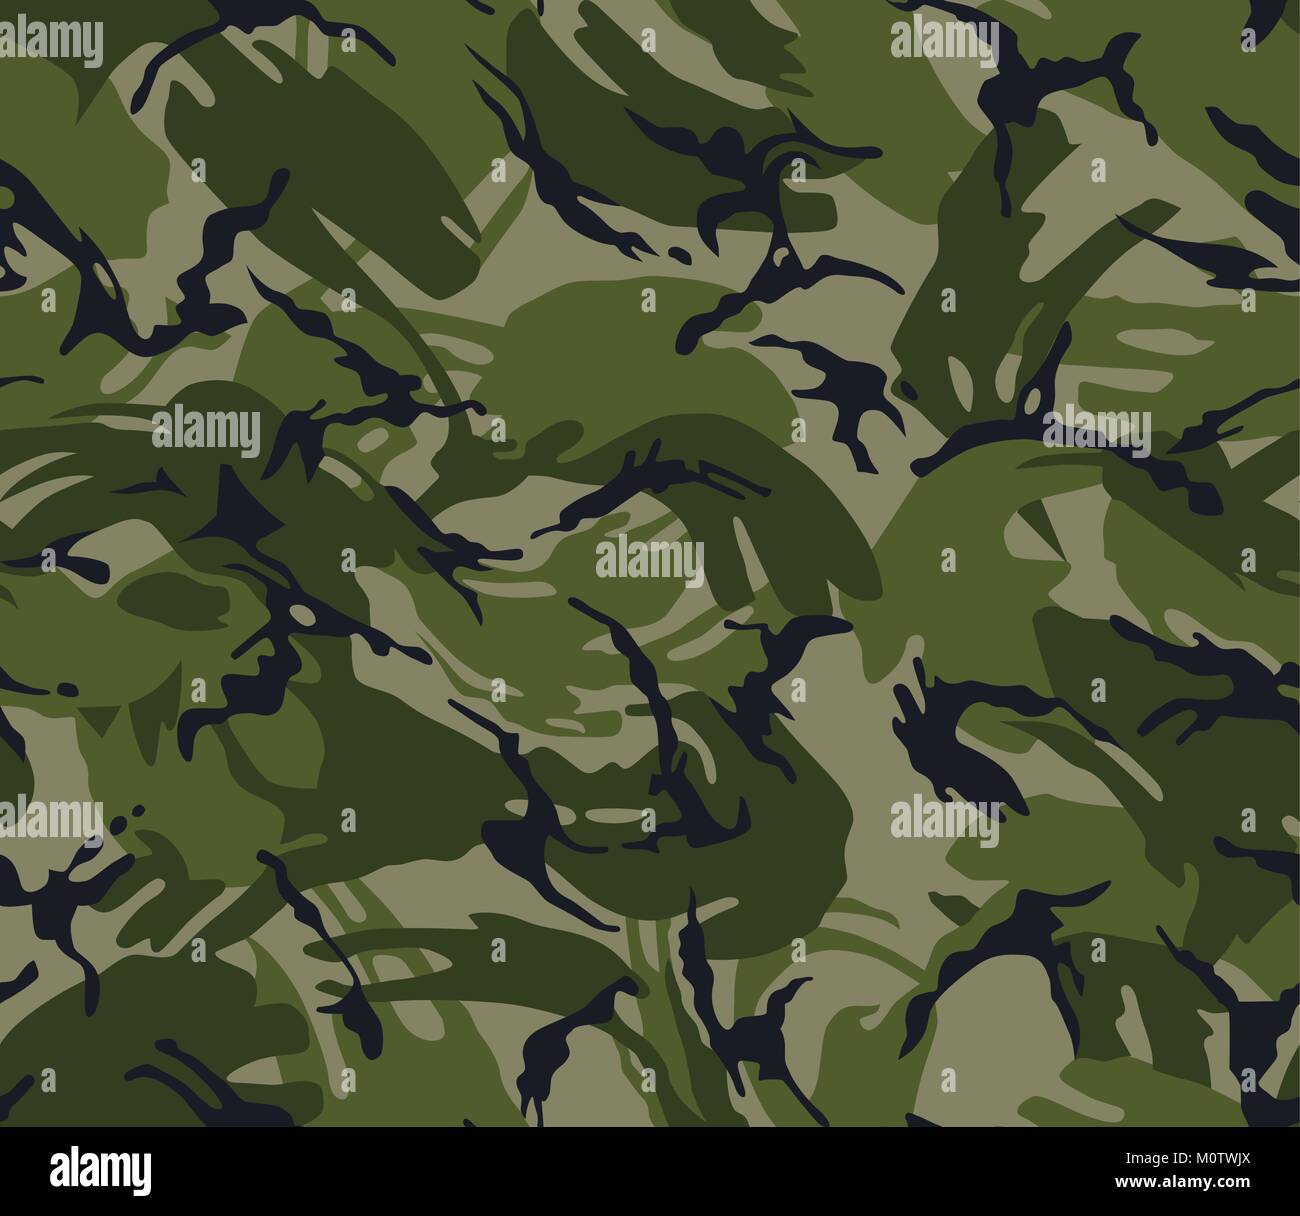 Camouflage Seamless Pattern Military Print In Green Colour Army